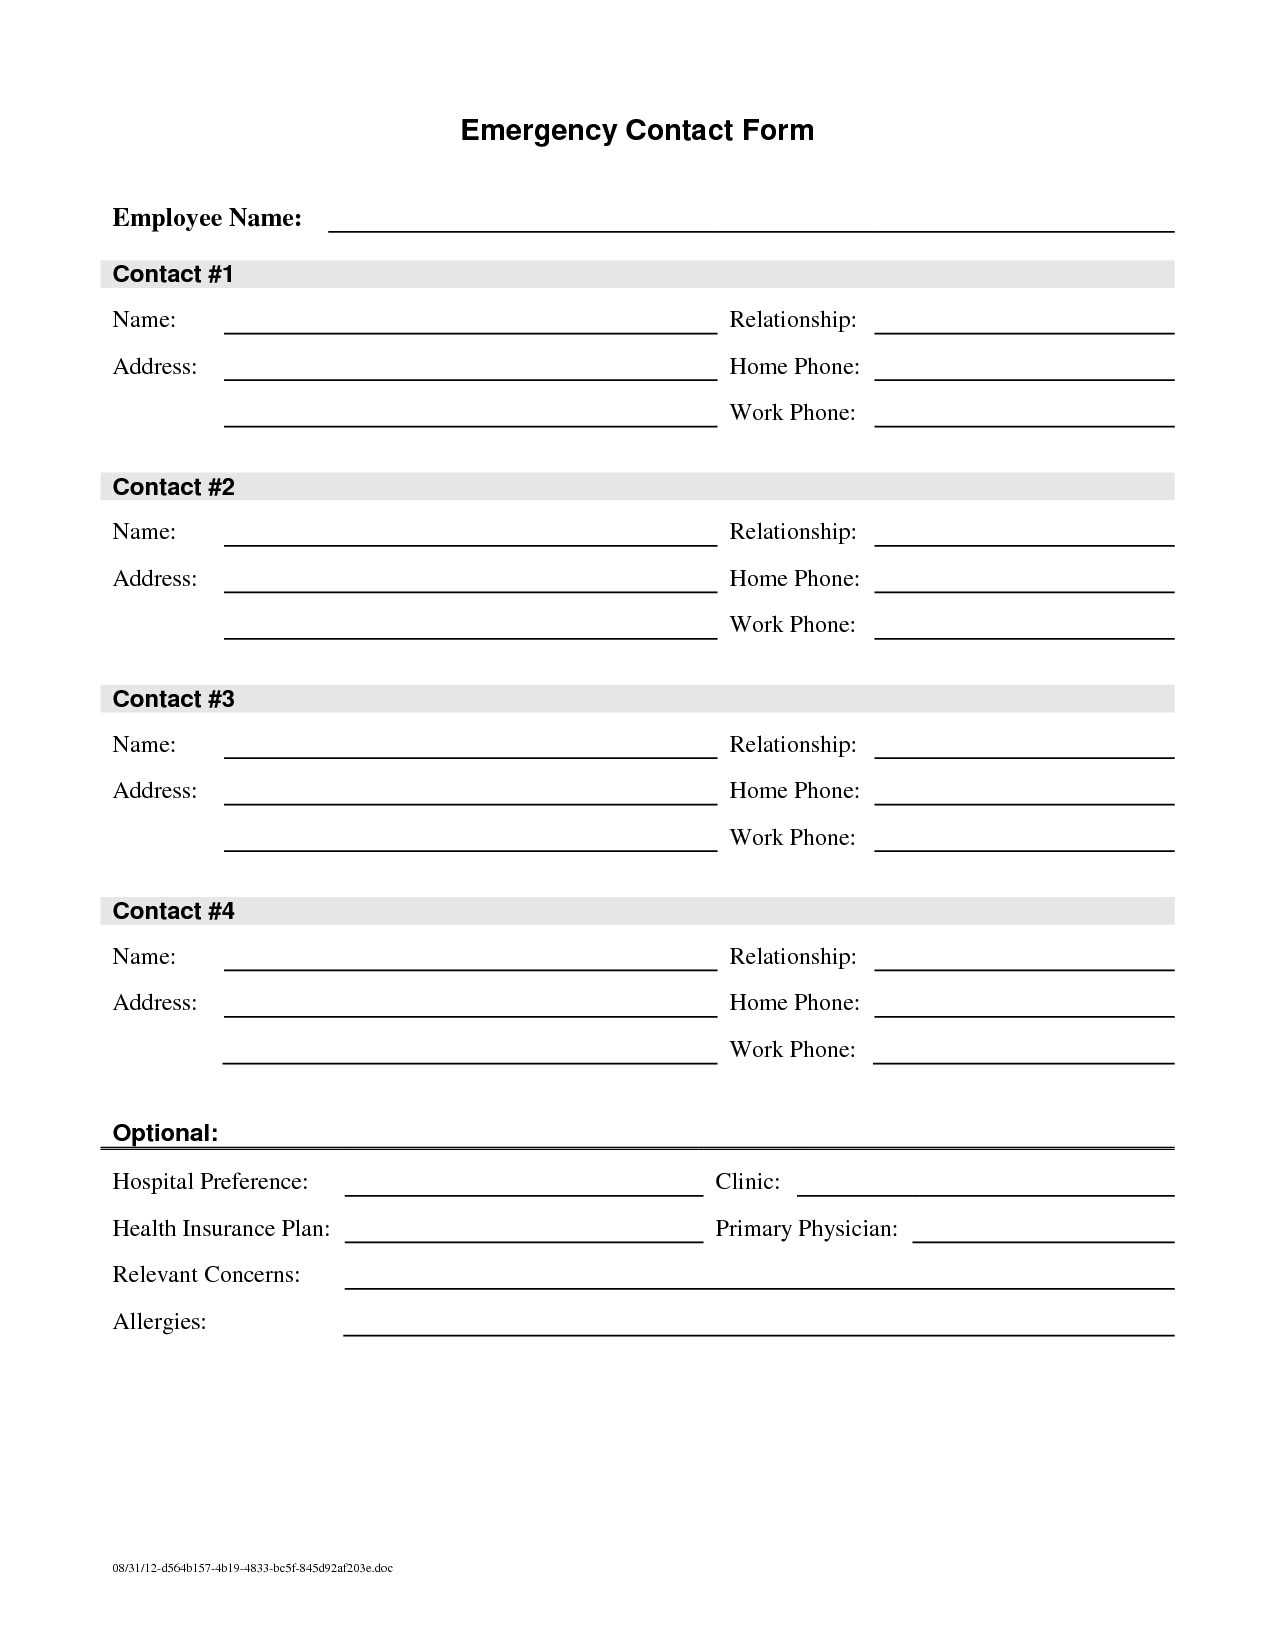 7-best-images-of-emergency-contact-printable-form-printable-emergency